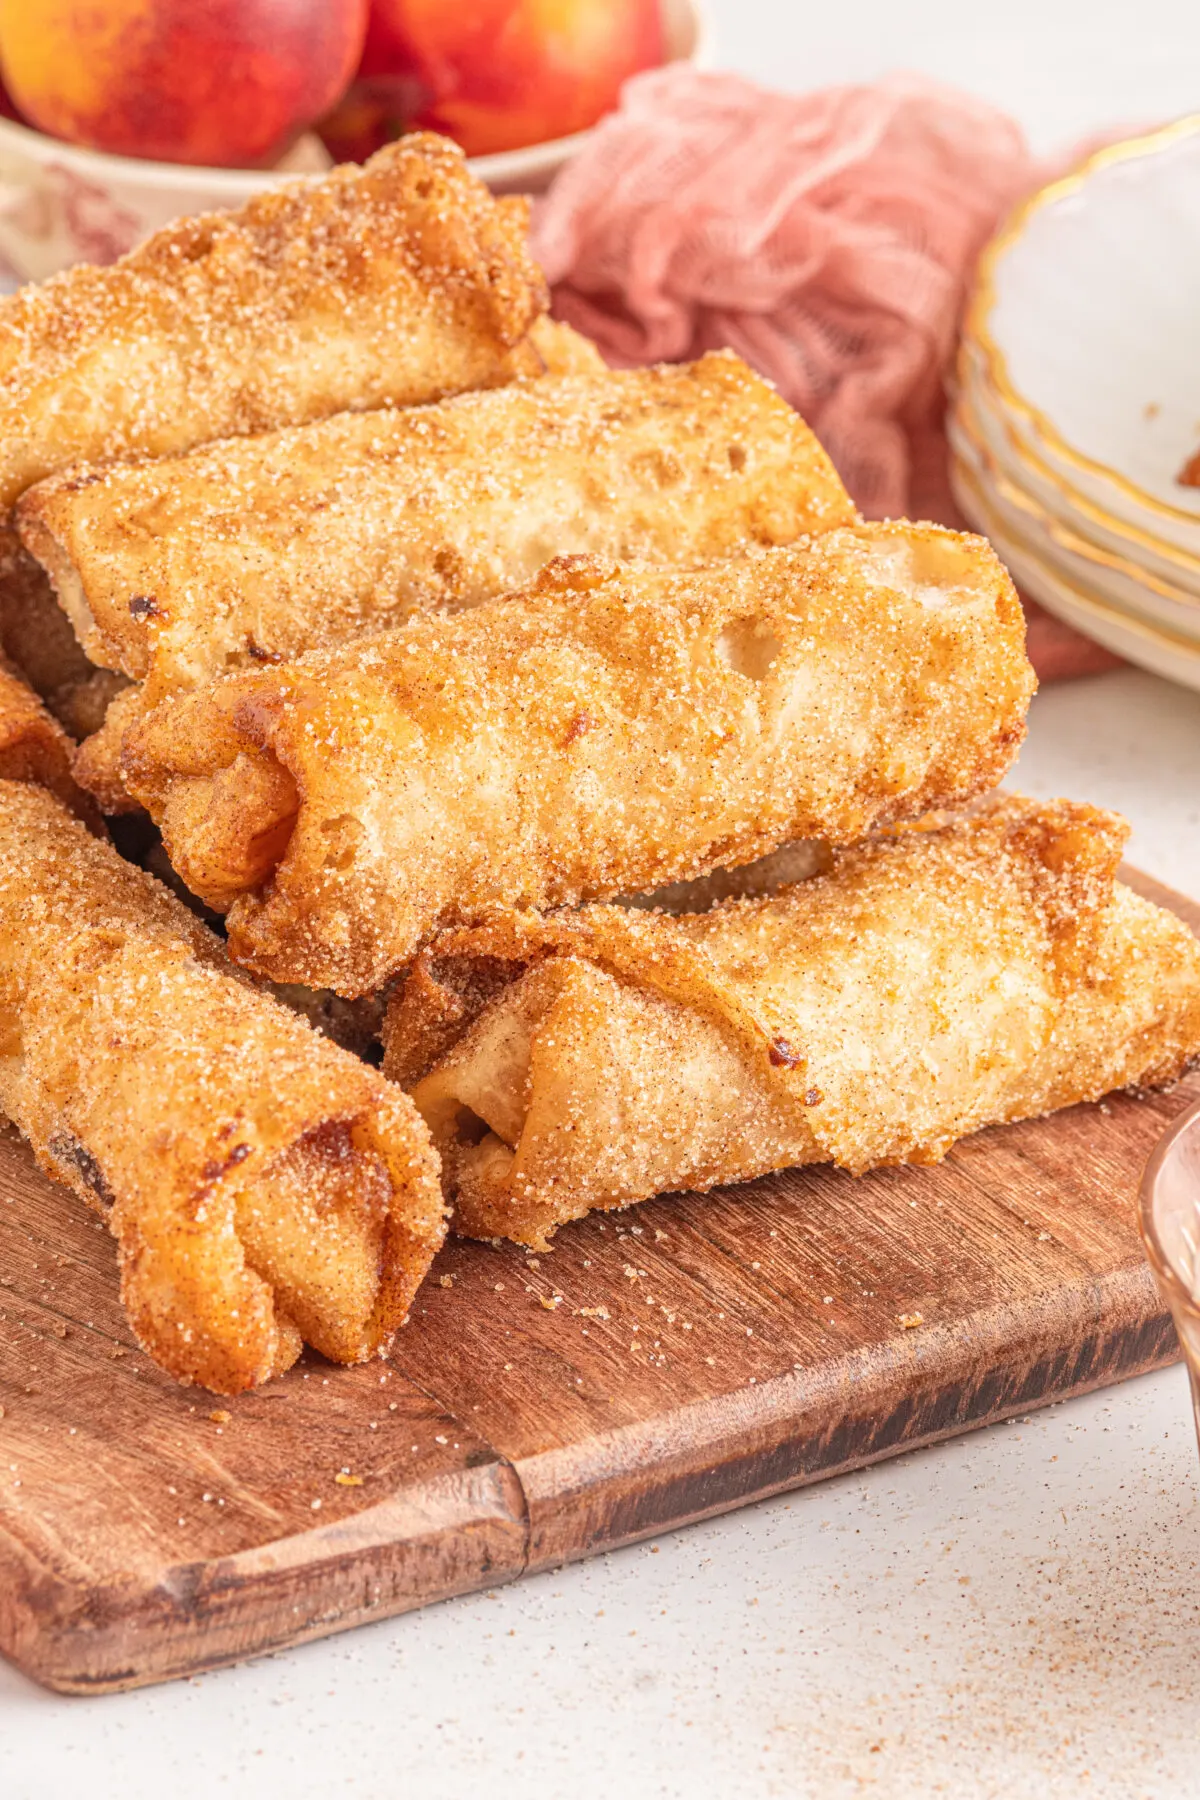 These Peach Cobbler egg rolls combine the sweet taste of peaches, with cinnamon and sugar, all wrapped up in crispy egg roll wrappers.